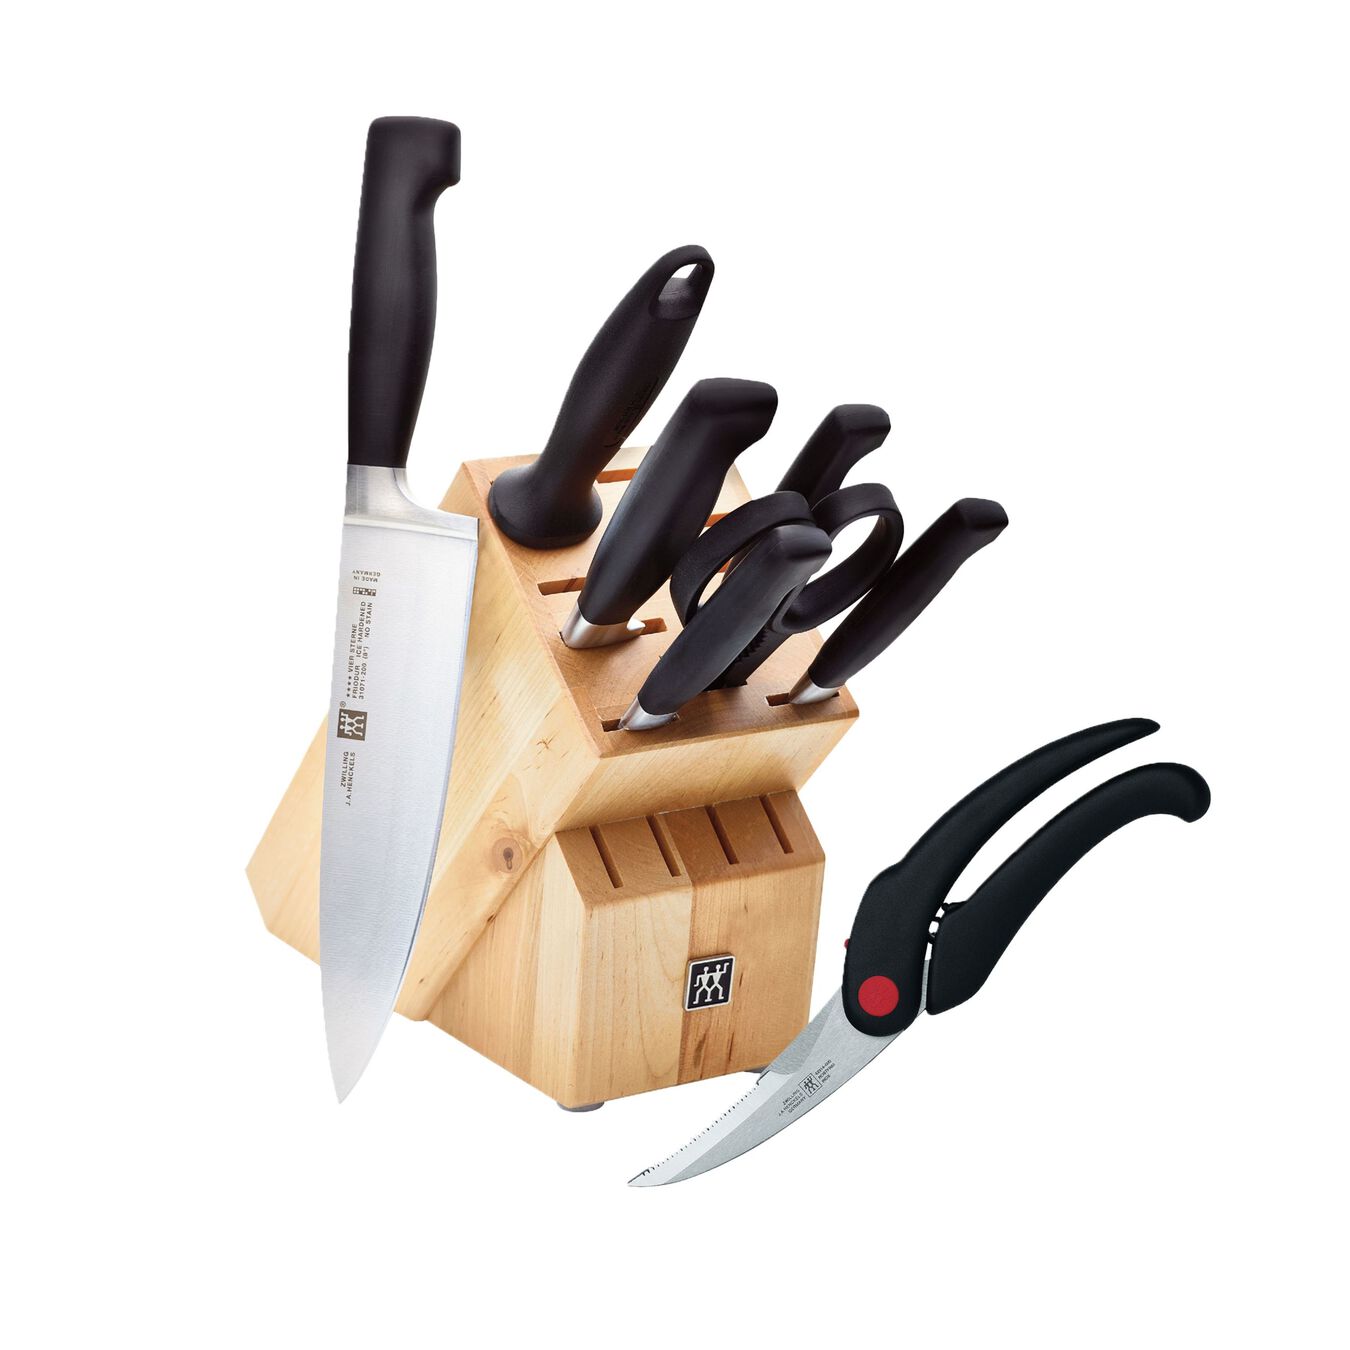 8 Piece KNIFE SET WITH BONUS POULTRY SHEARS,,large 1